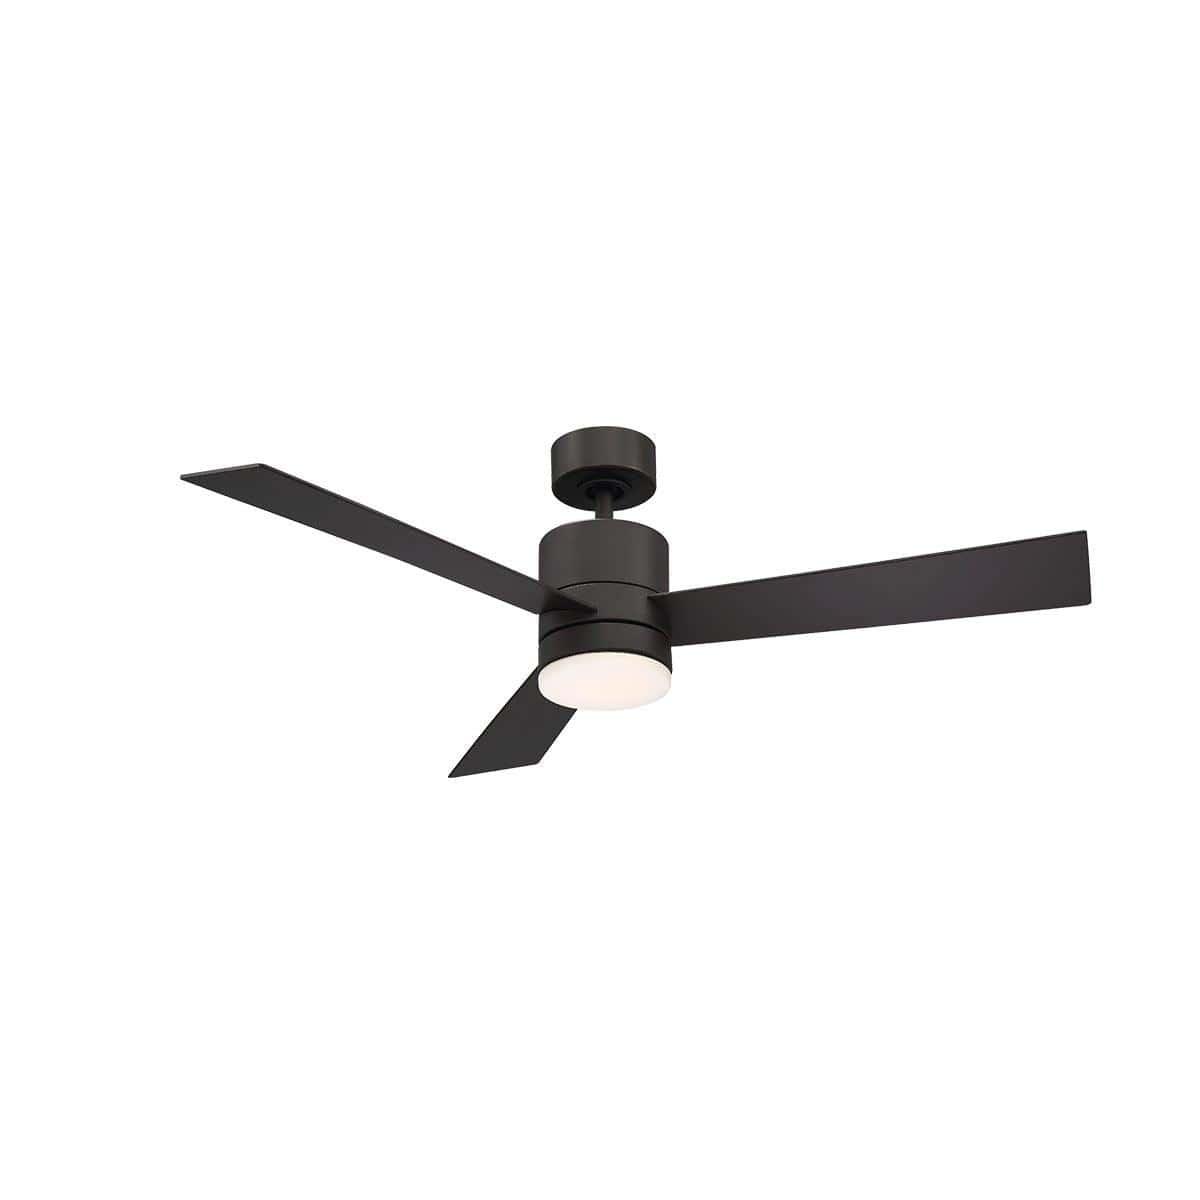 Modern Forms - Axis Ceiling Fan - FR-W1803-52L-35-MB | Montreal Lighting & Hardware